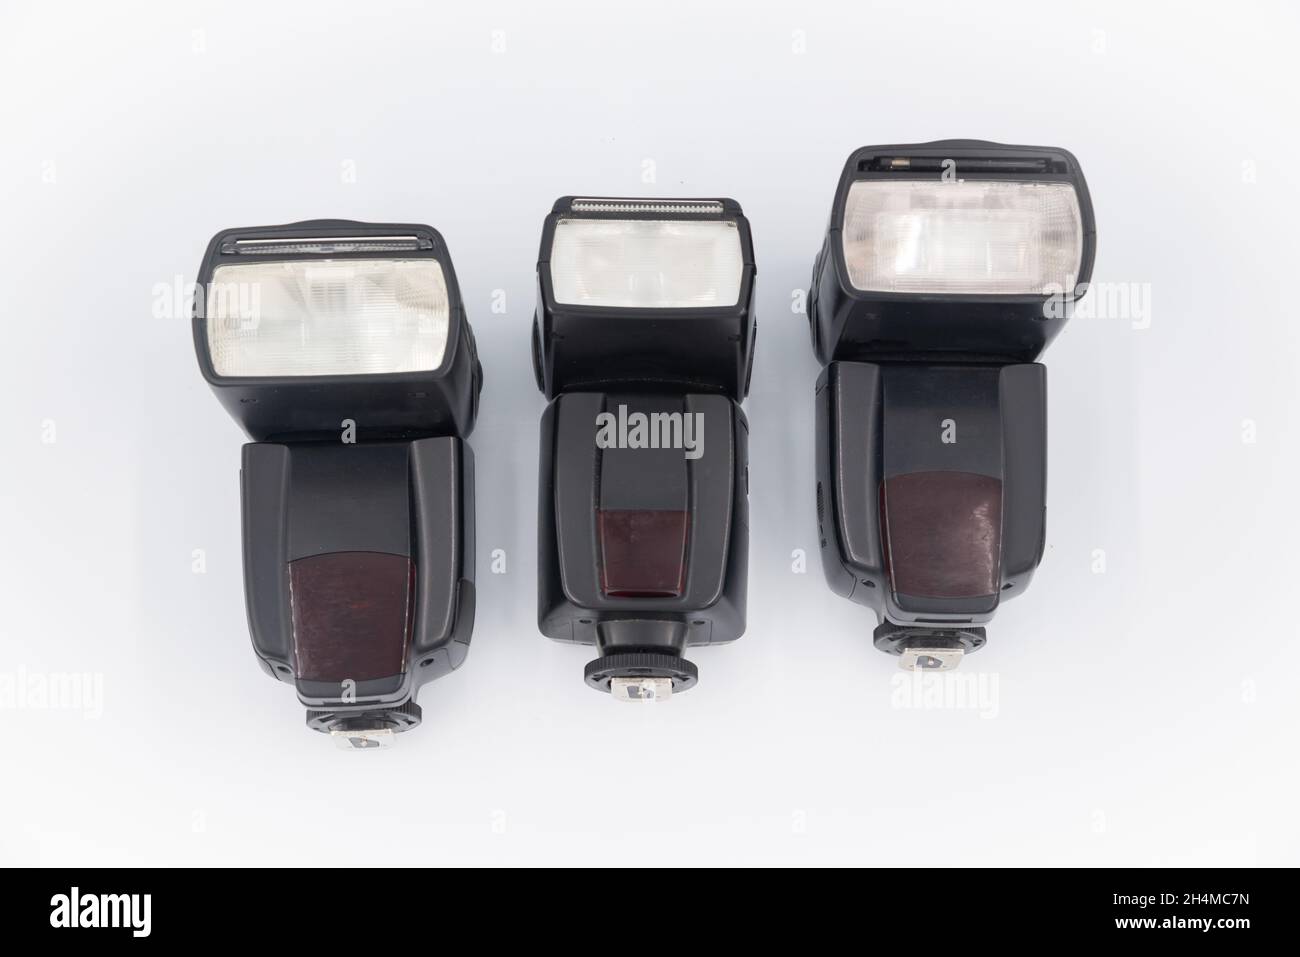 Three Black external flashes on a white background. Used for indoor and outdoor lighting. Copy location. Photo technology concept Stock Photo